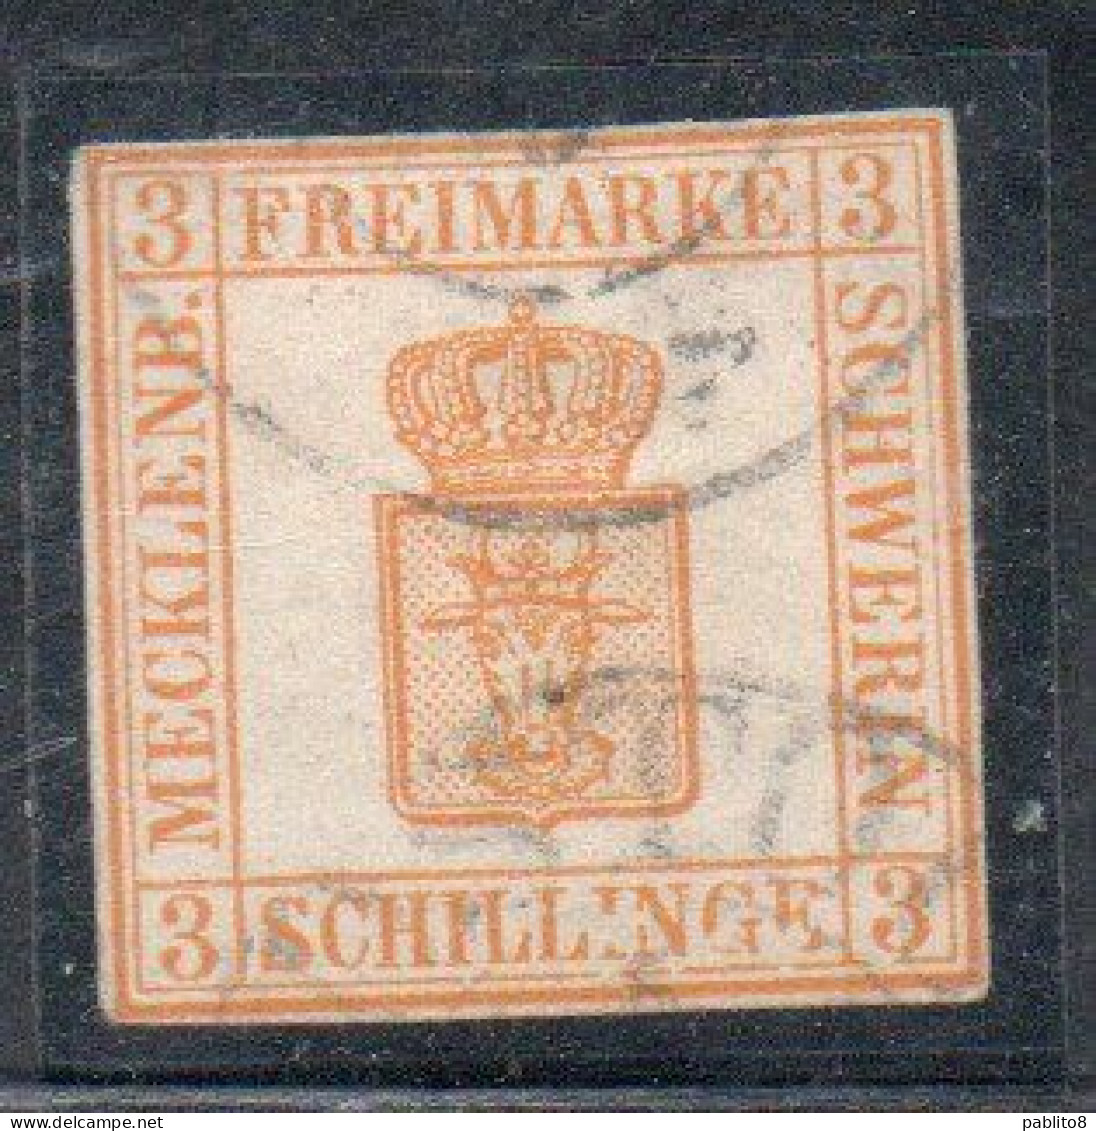 GERMANY GERMANIA GERMAN OLD STATES MECKLENBURG-SCHWERIN 1856 COAT OF ARMS STEMMA ARMOIRIES 3s USED USATO OBLITERE' - Oldenbourg